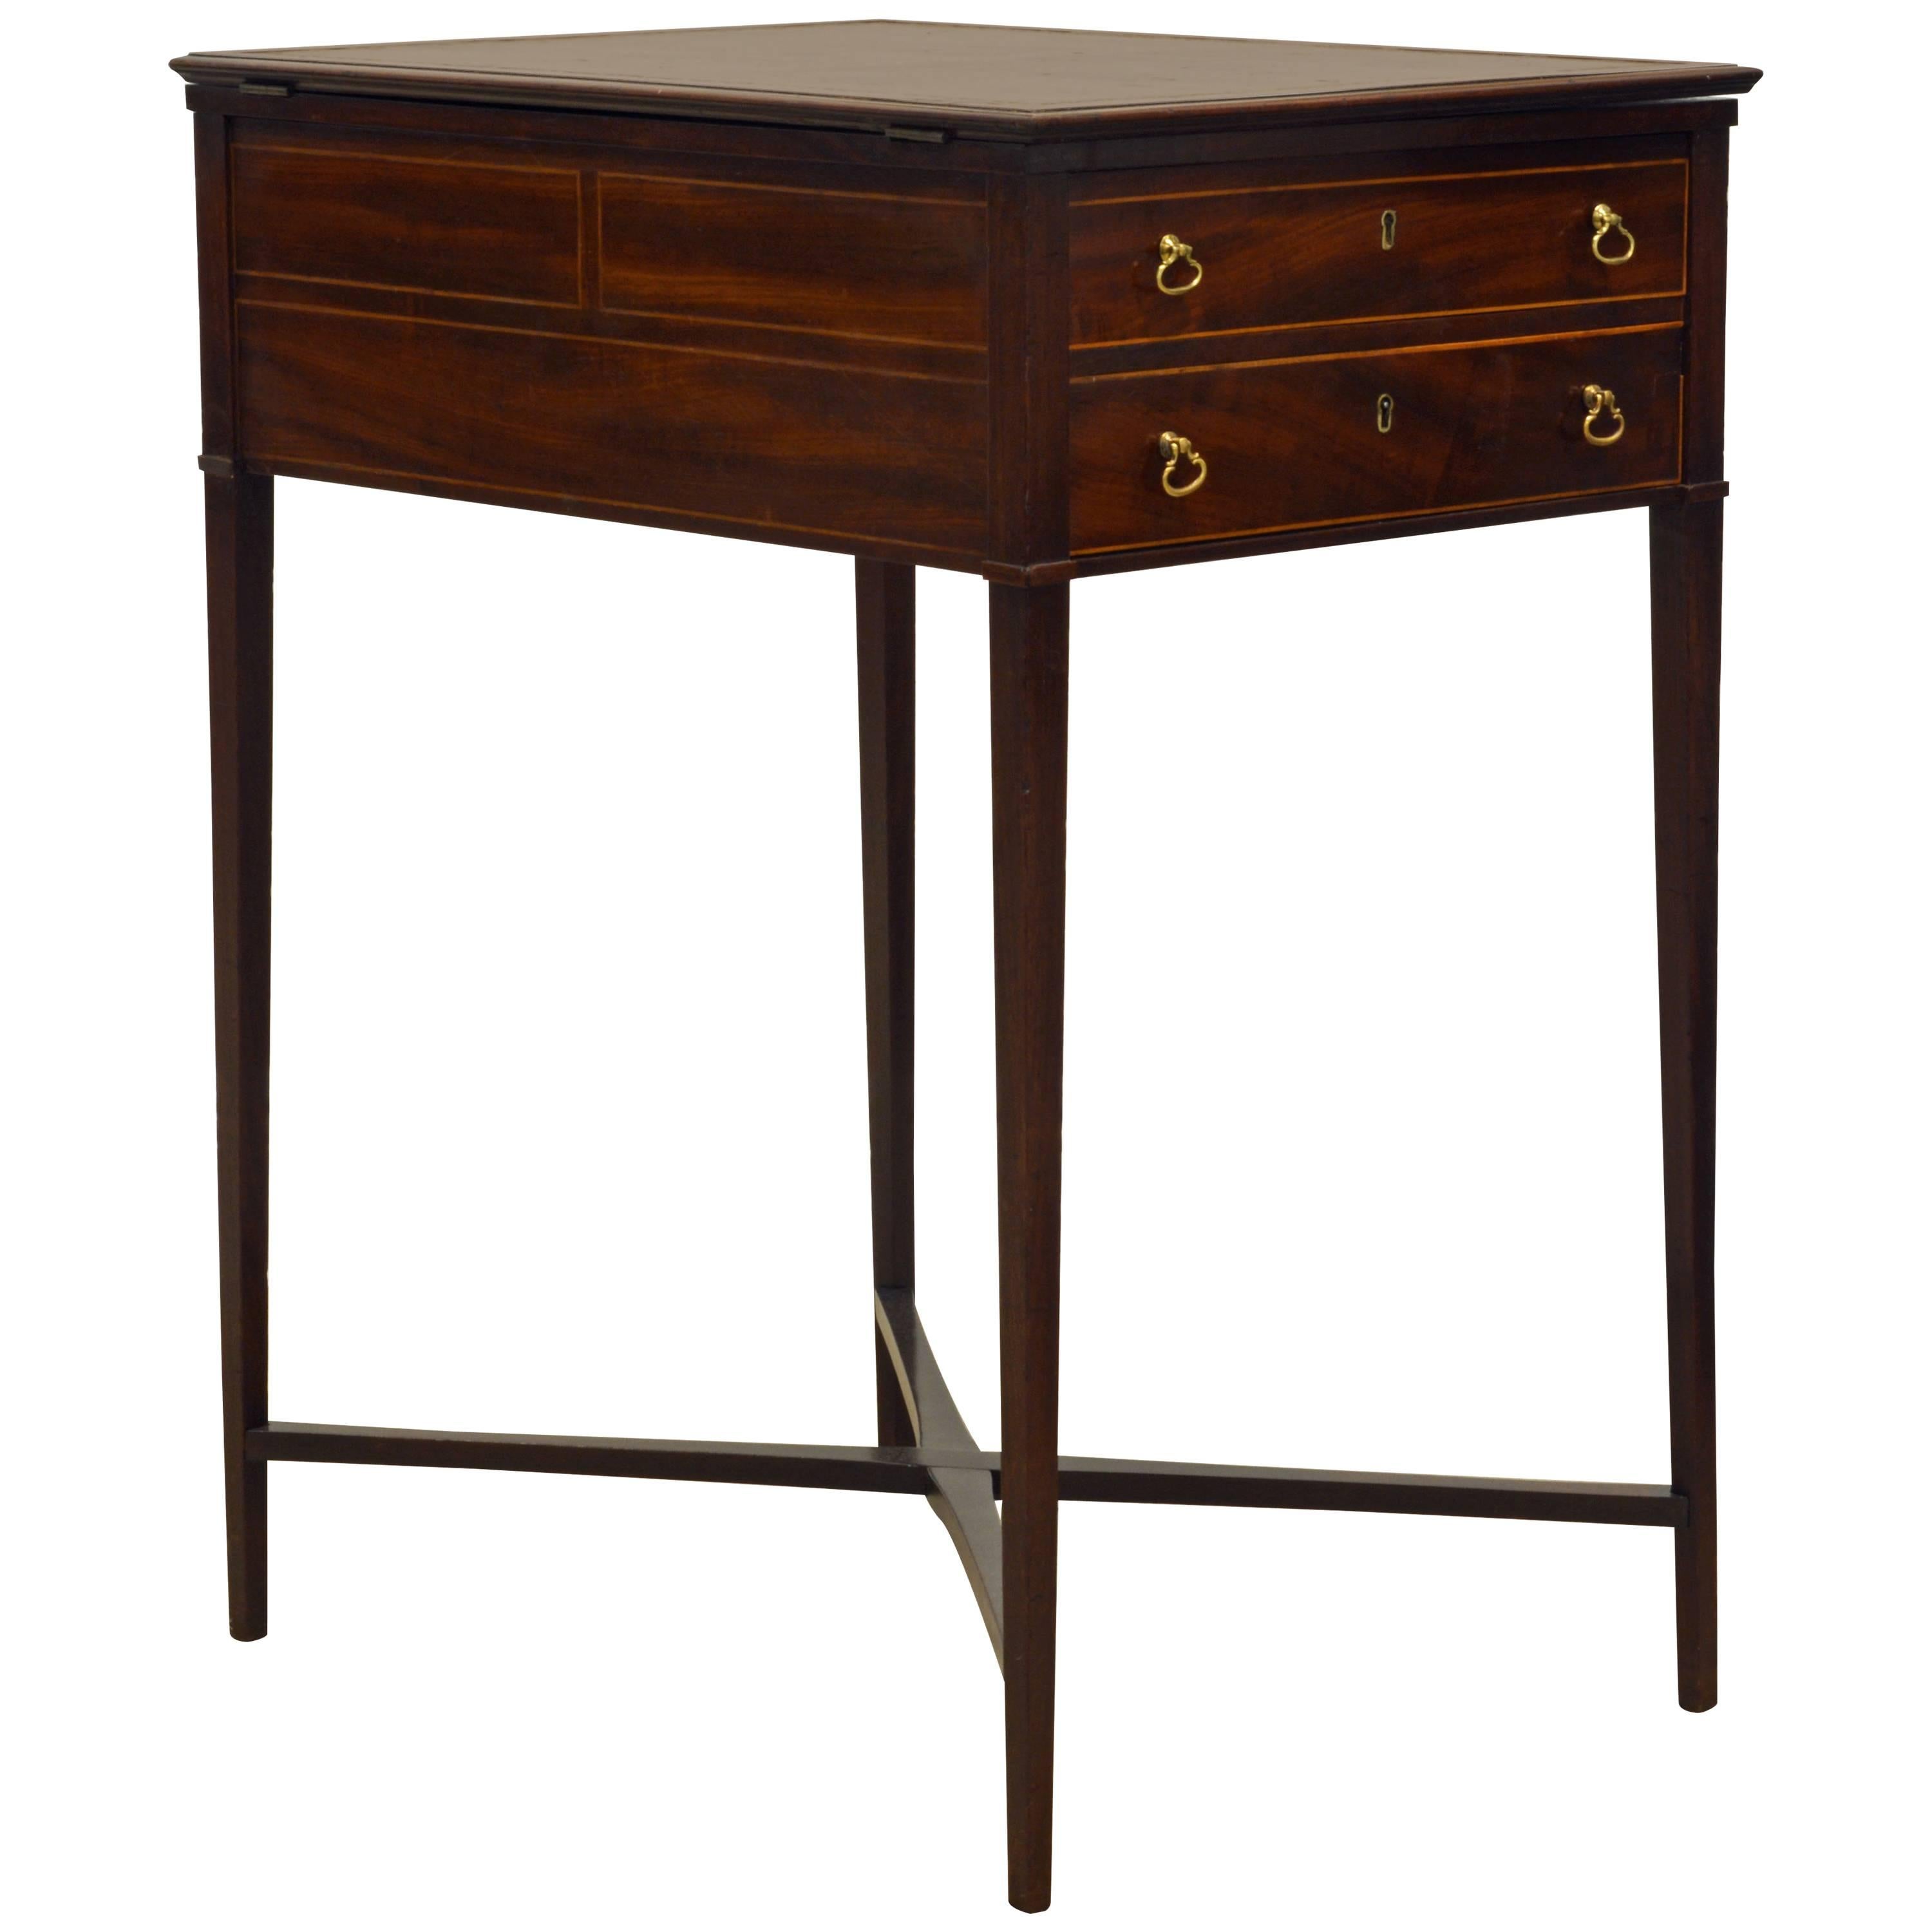 Mid-19th Century Georgian Mahogany Work Table and Lectern by Gillows Lancaster